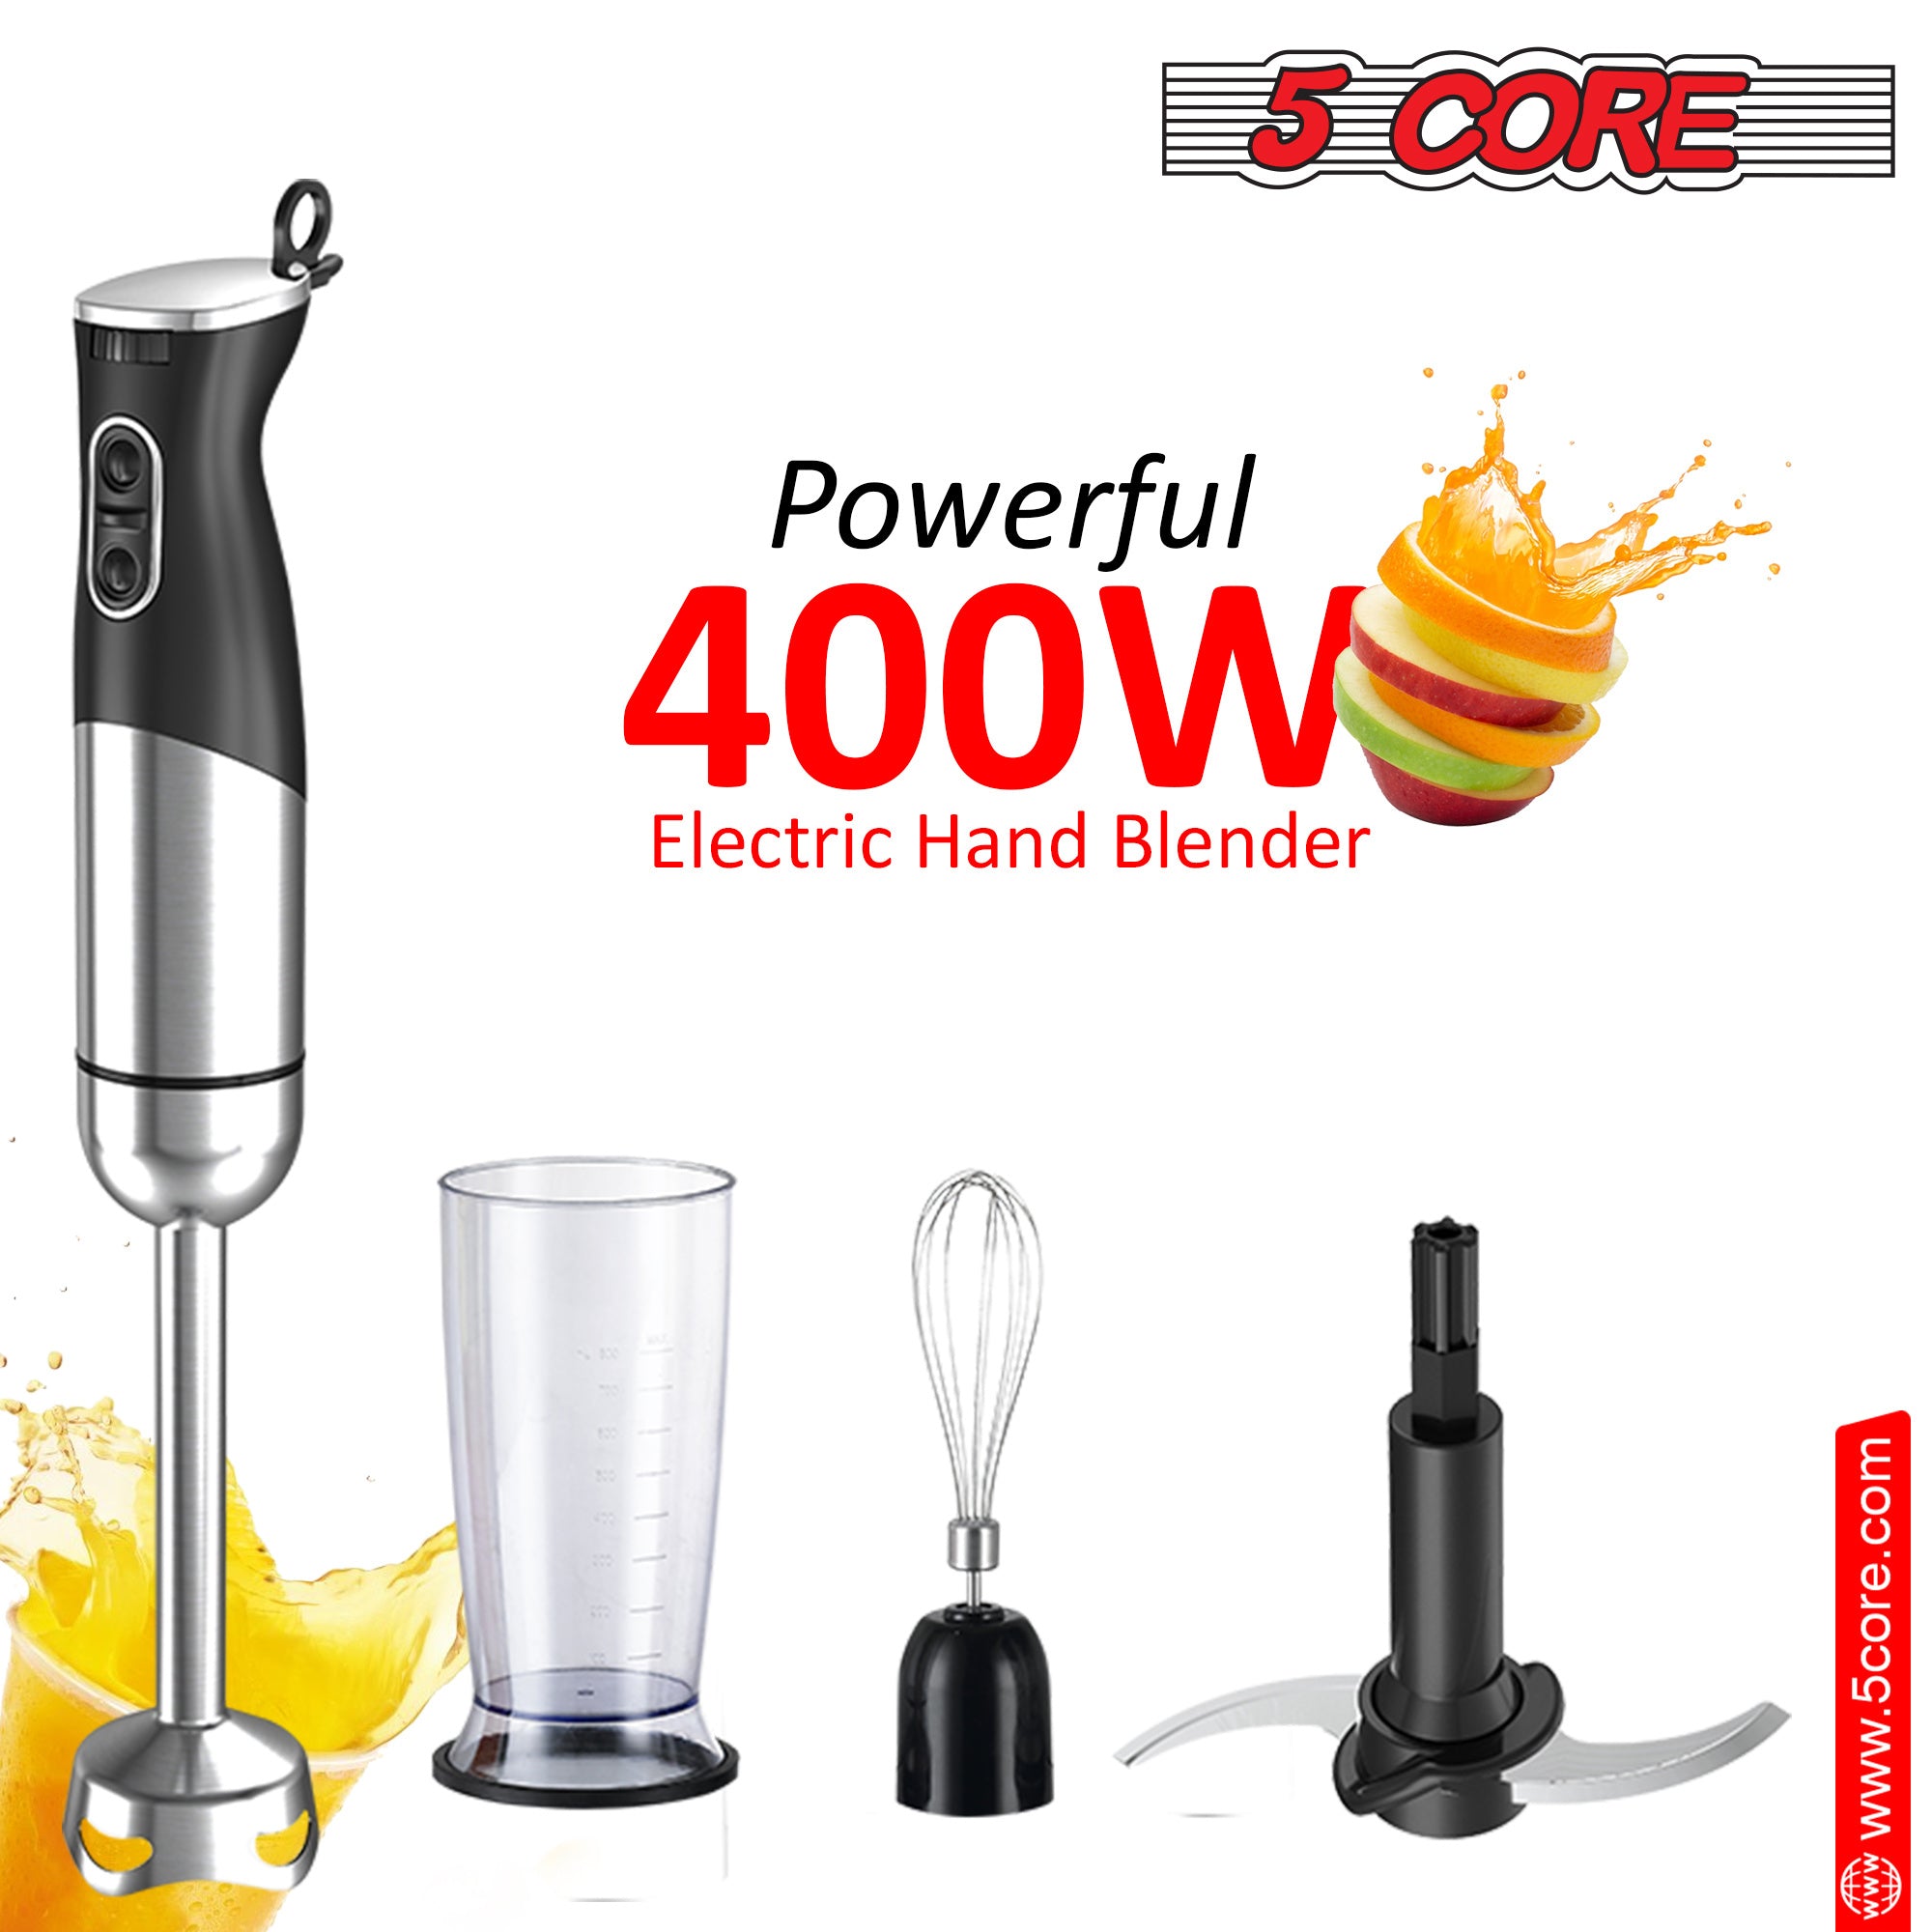 An 5Core 400W Immersion Hand Blender Multifunctional Electric 9 speed 2 accessories HB 1516 with fruit and a glass of juice.